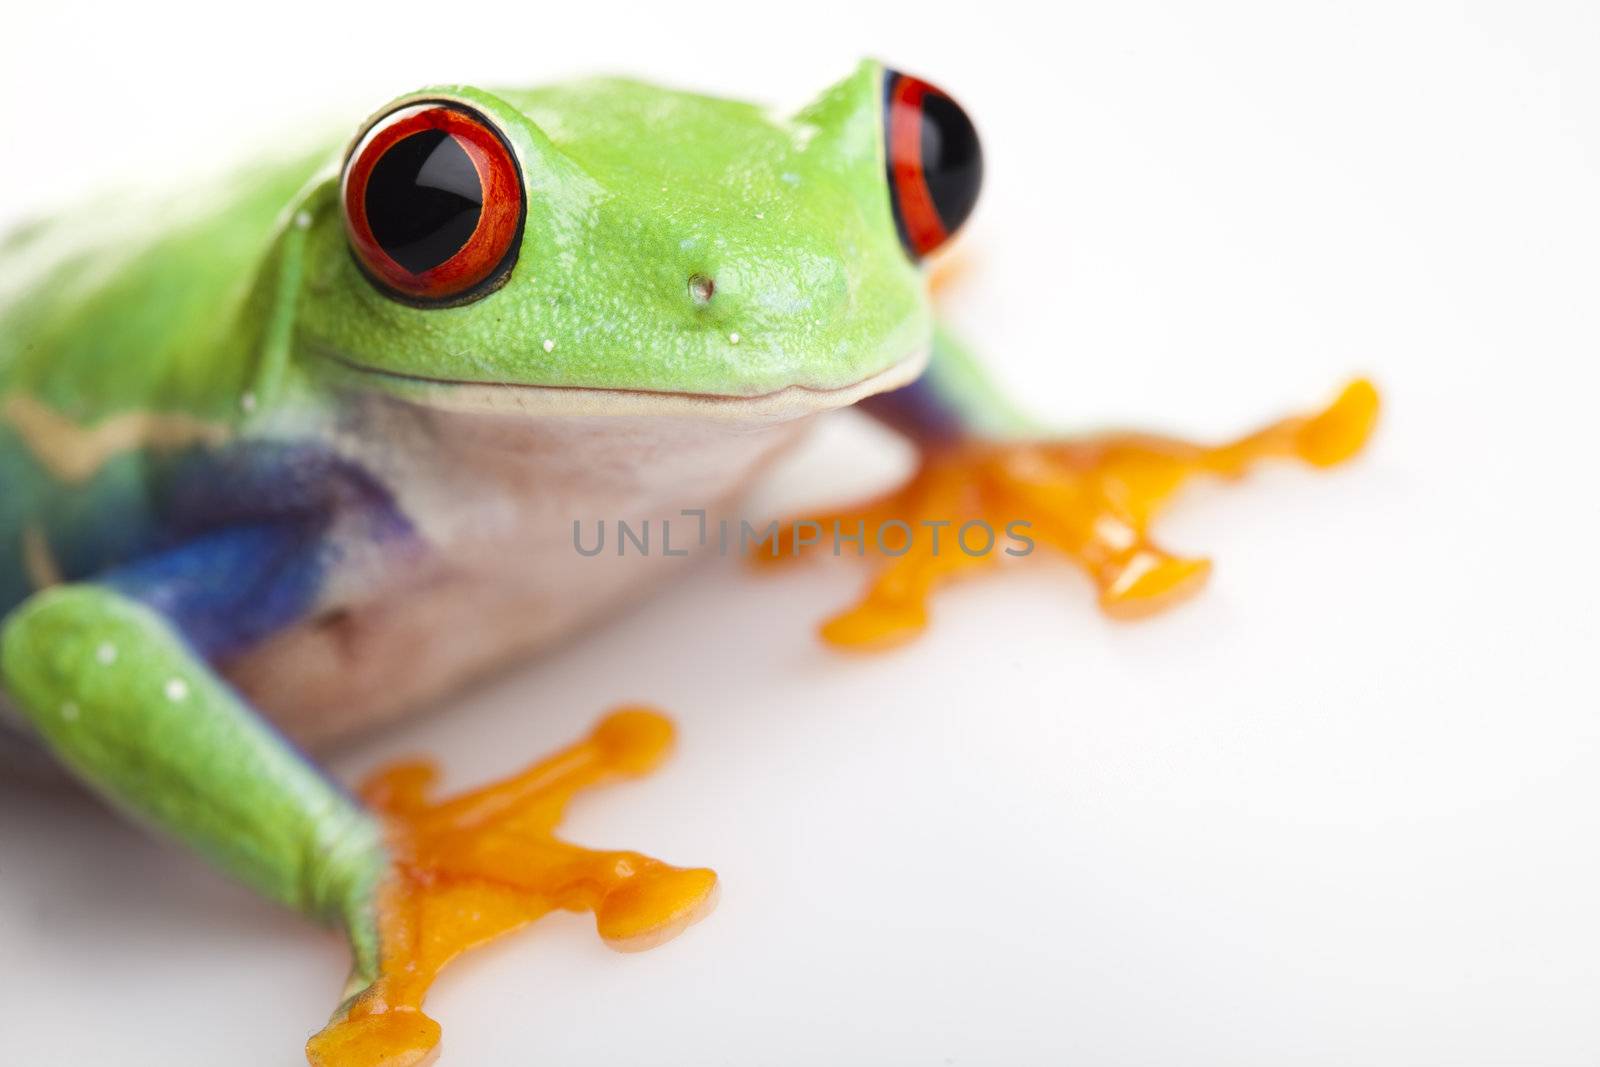 Frog - small animal with smooth skin and long legs that are used for jumping. 